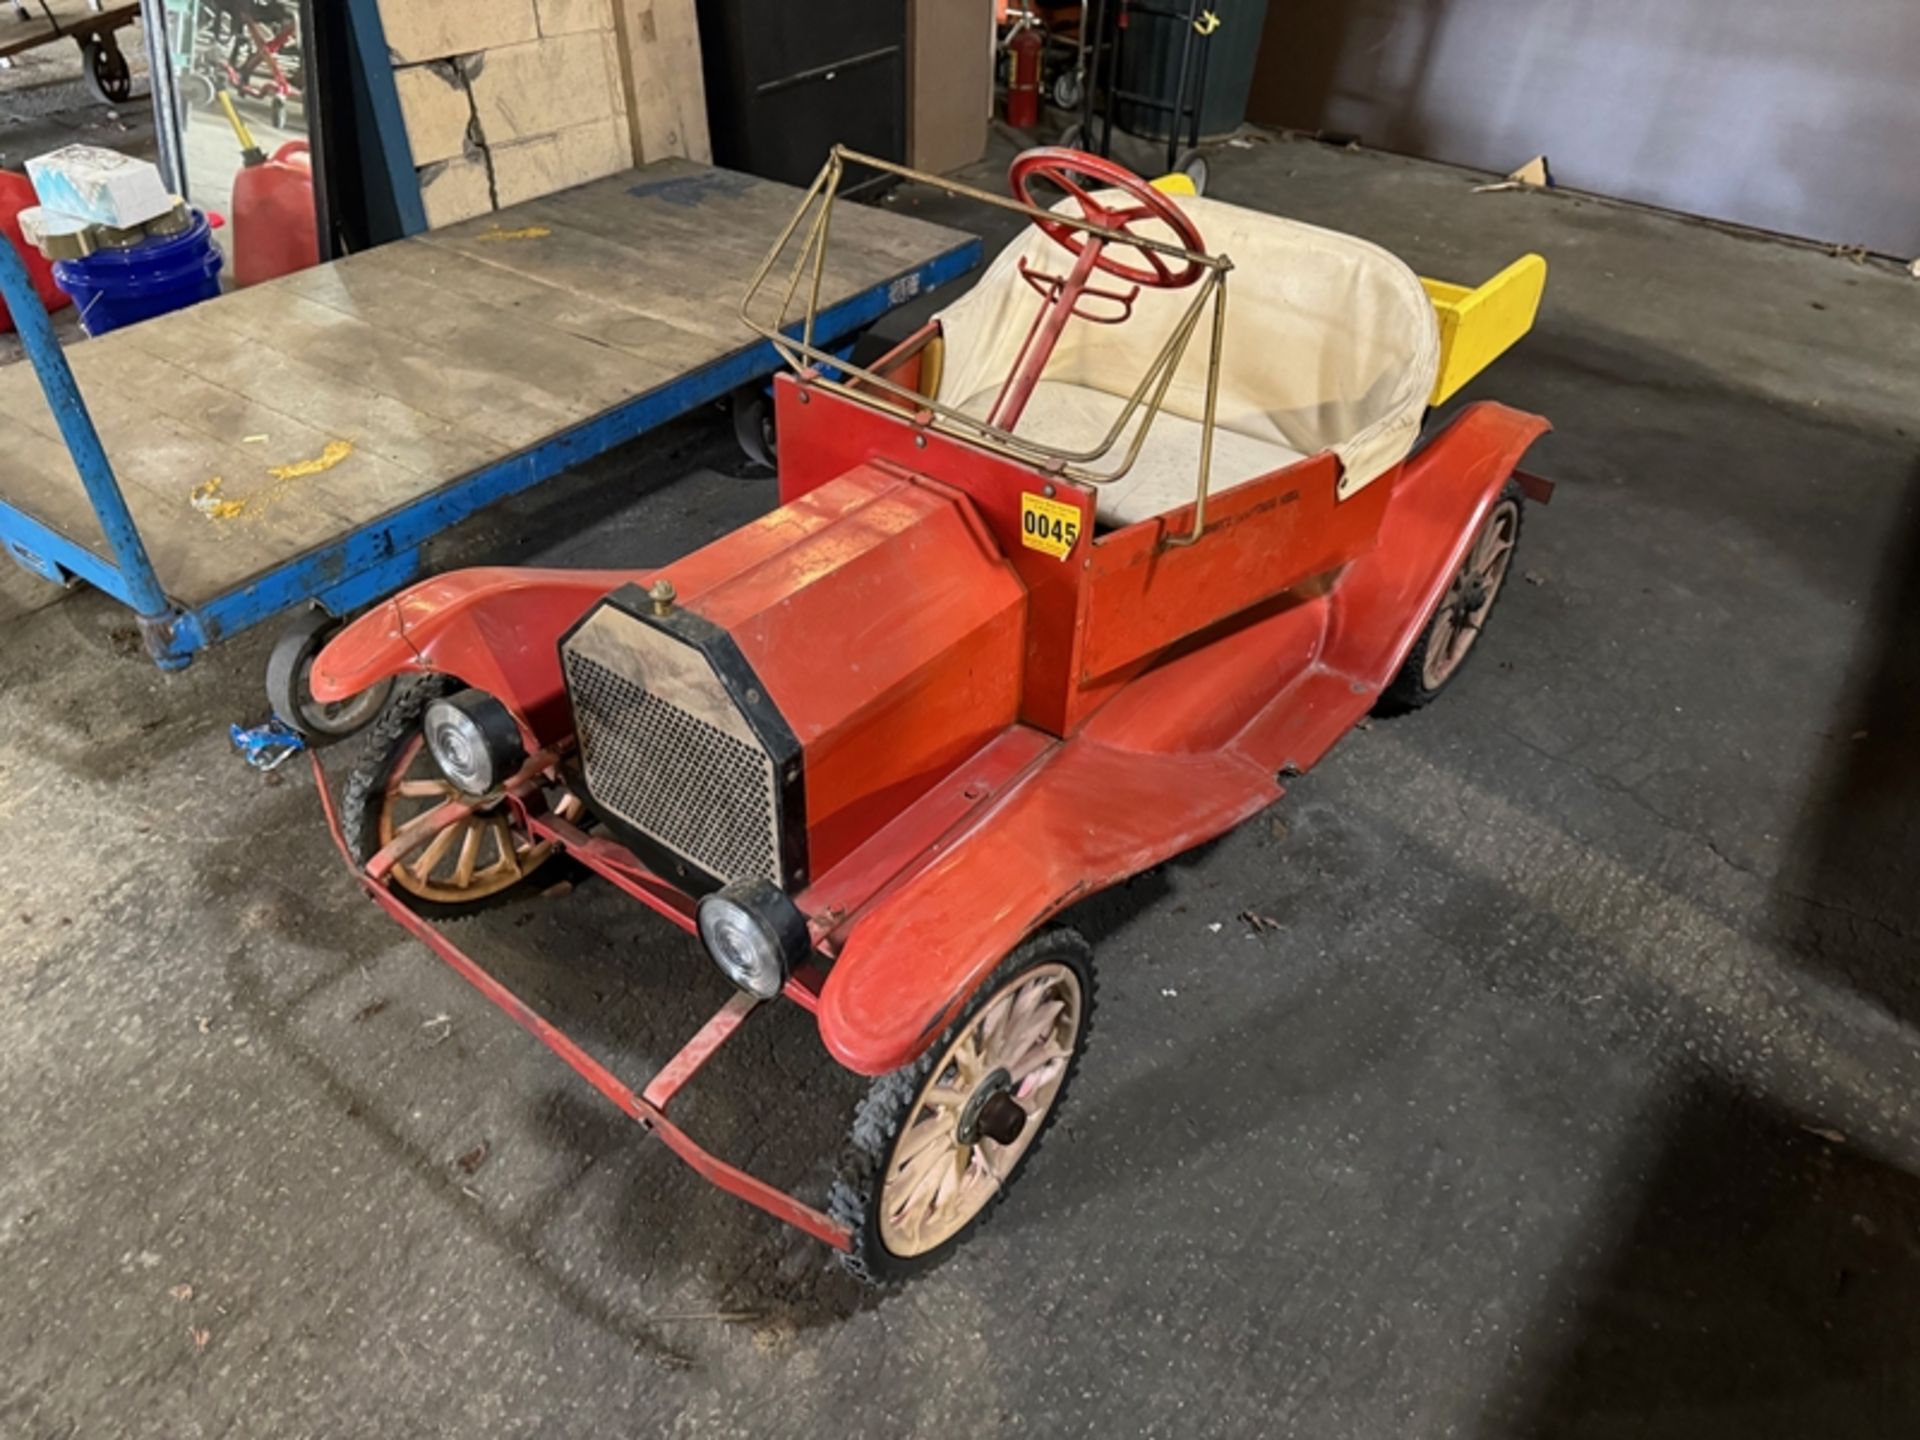 Antique gas-powered miniature parade truck with dump body